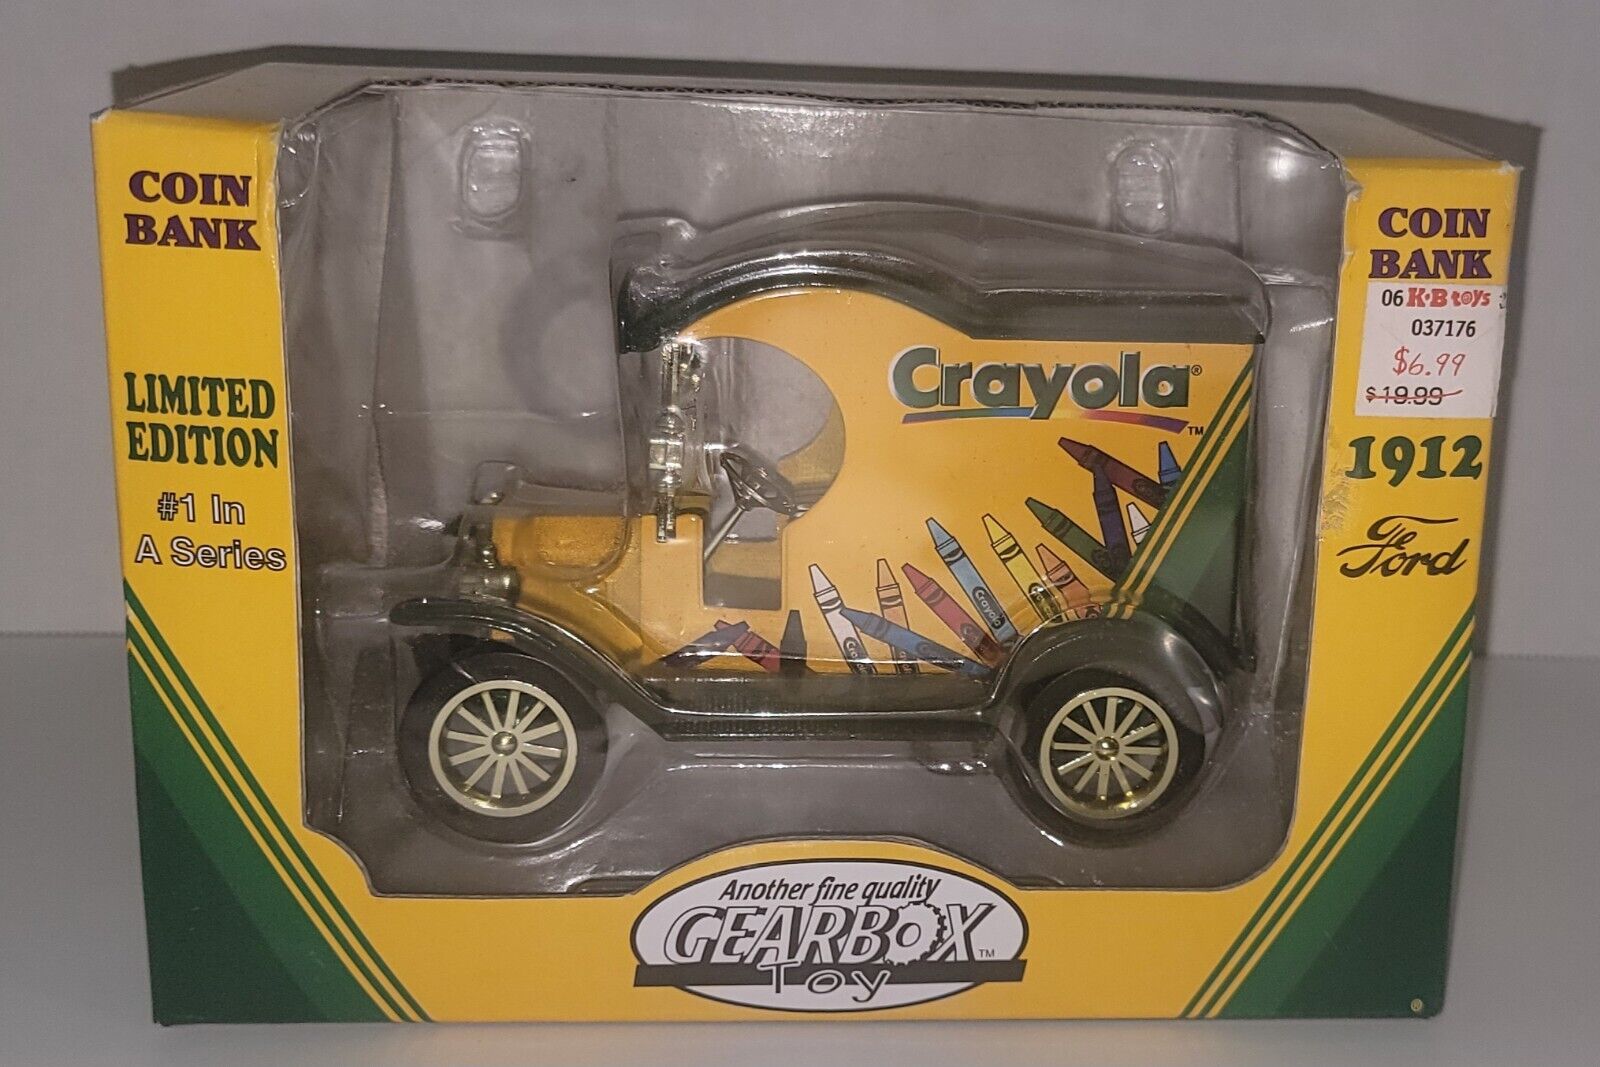 1998 Crayola Truck Coin Bank Diecast 1912 Ford Limited Edition #1 in a Series 